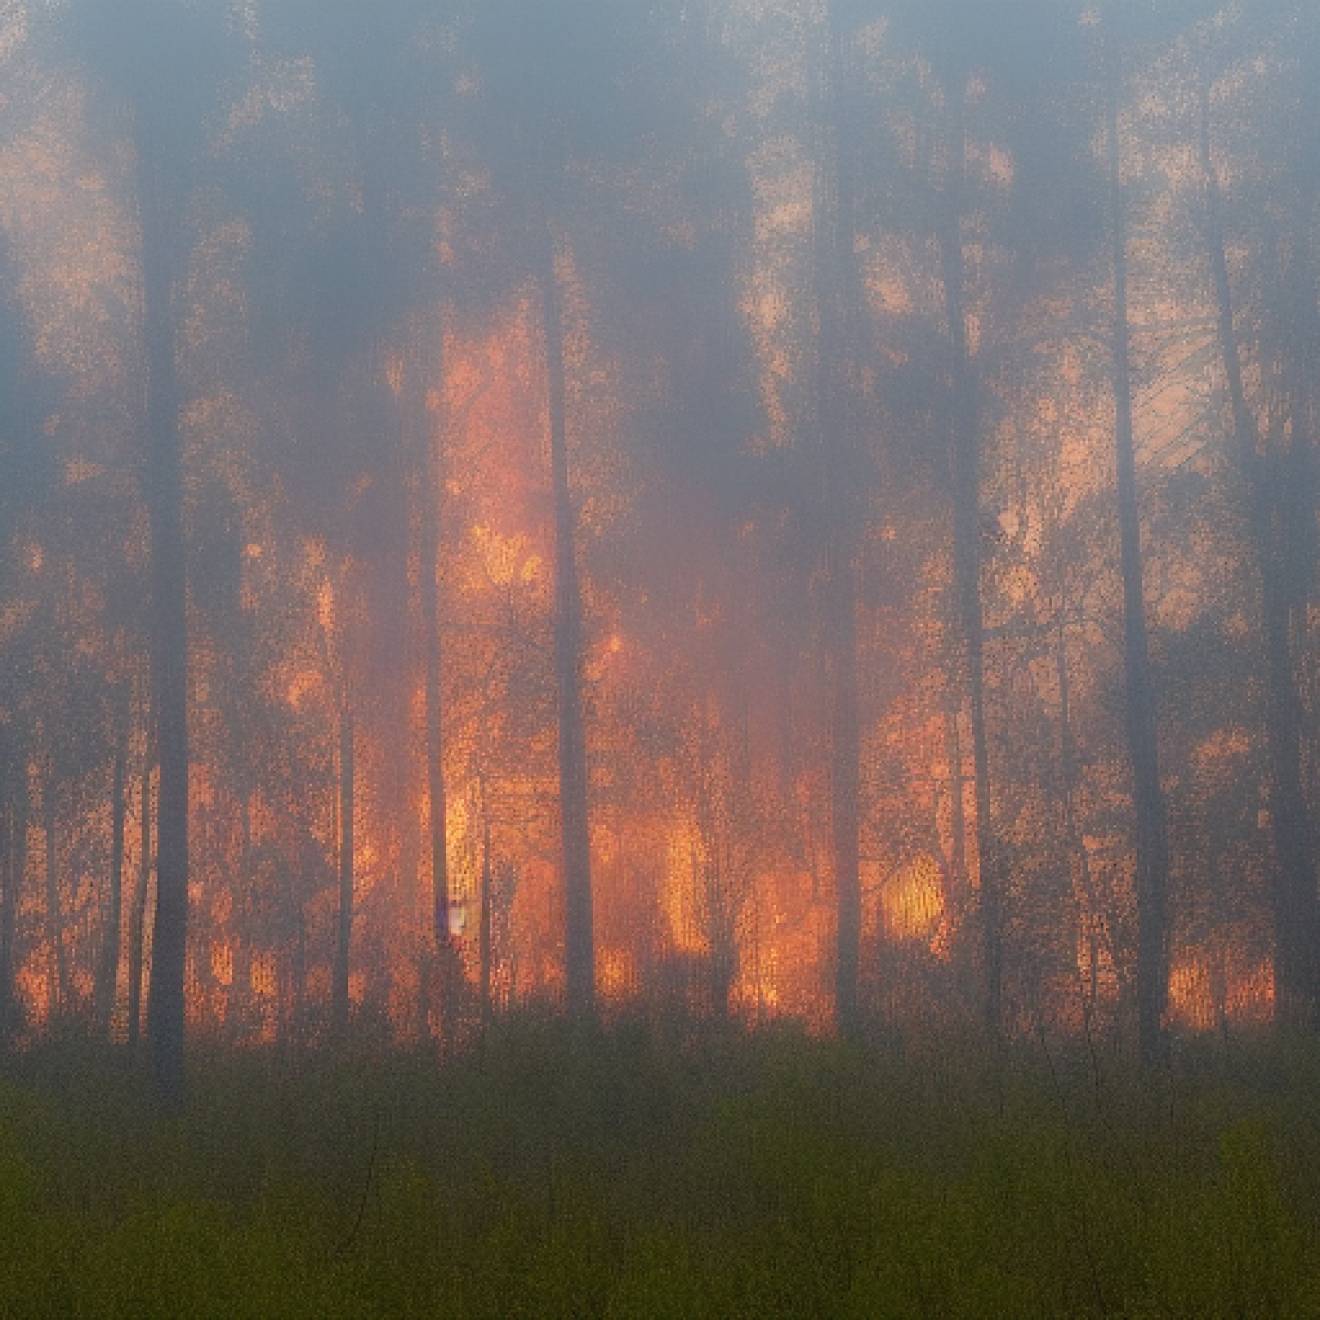 A realistic picture of a wildfire in the woods, as simulated by artificial intelligence